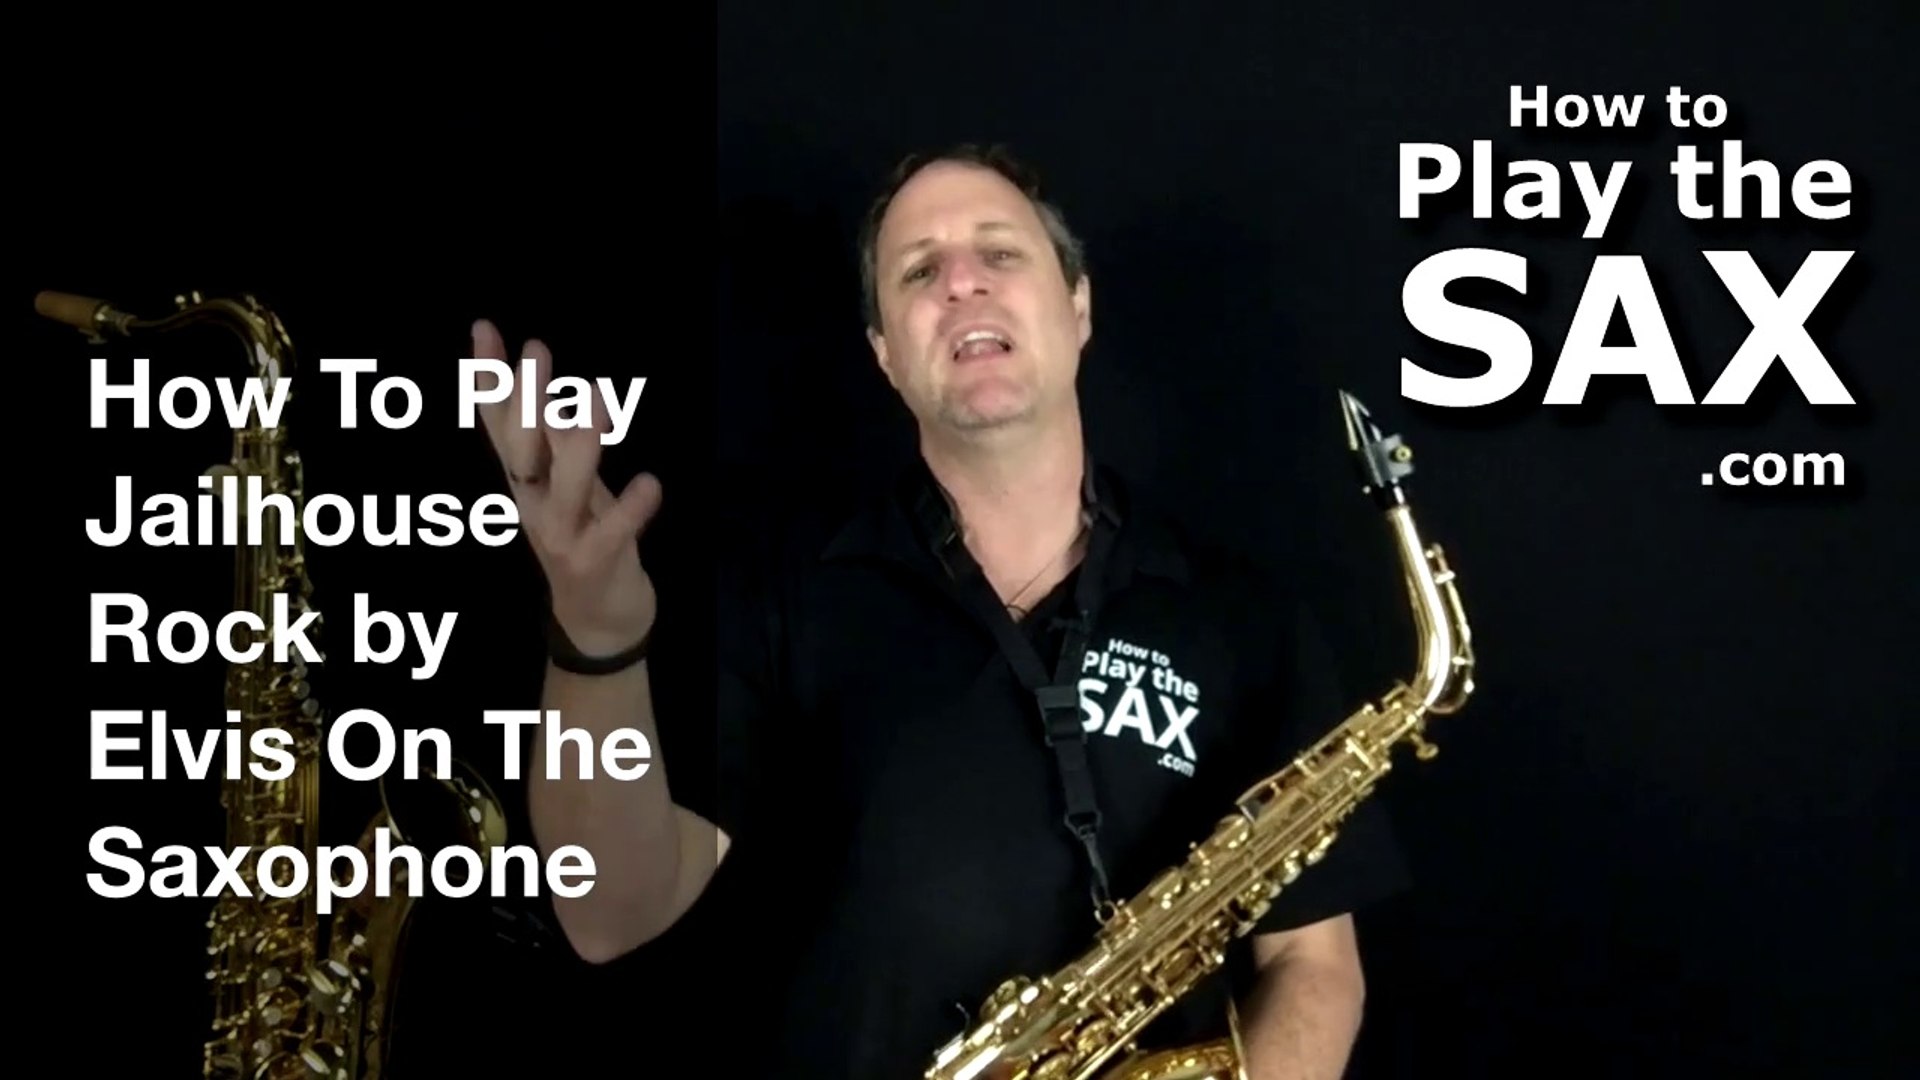 How To Play Jailhouse Rock by Elvis Presley On The Saxophone | Saxophone  Lessons - video Dailymotion